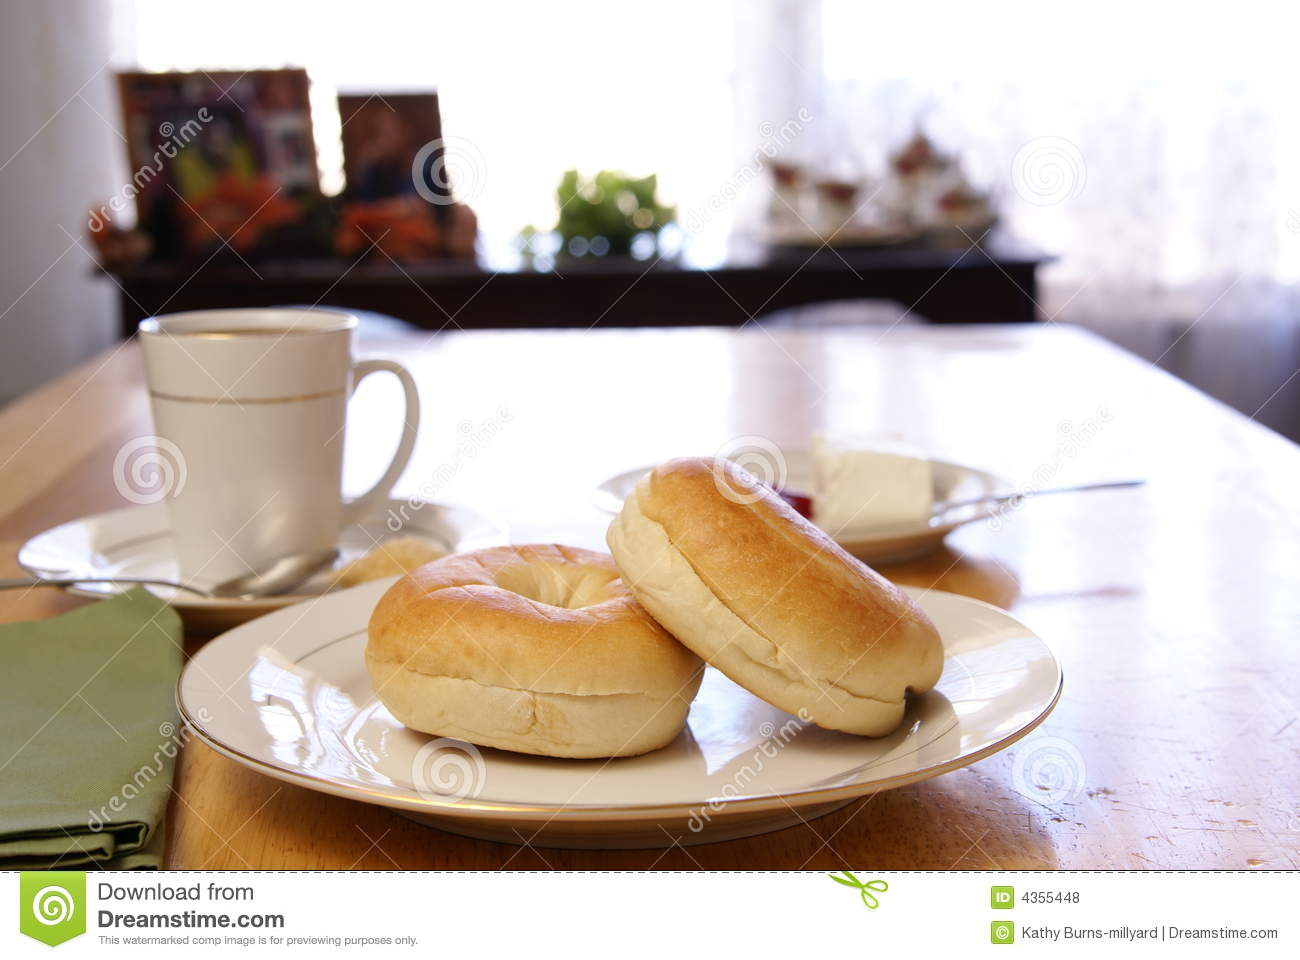 Breakfast Of Plain Bagels With Coffee Cream Cheese And Strawberry